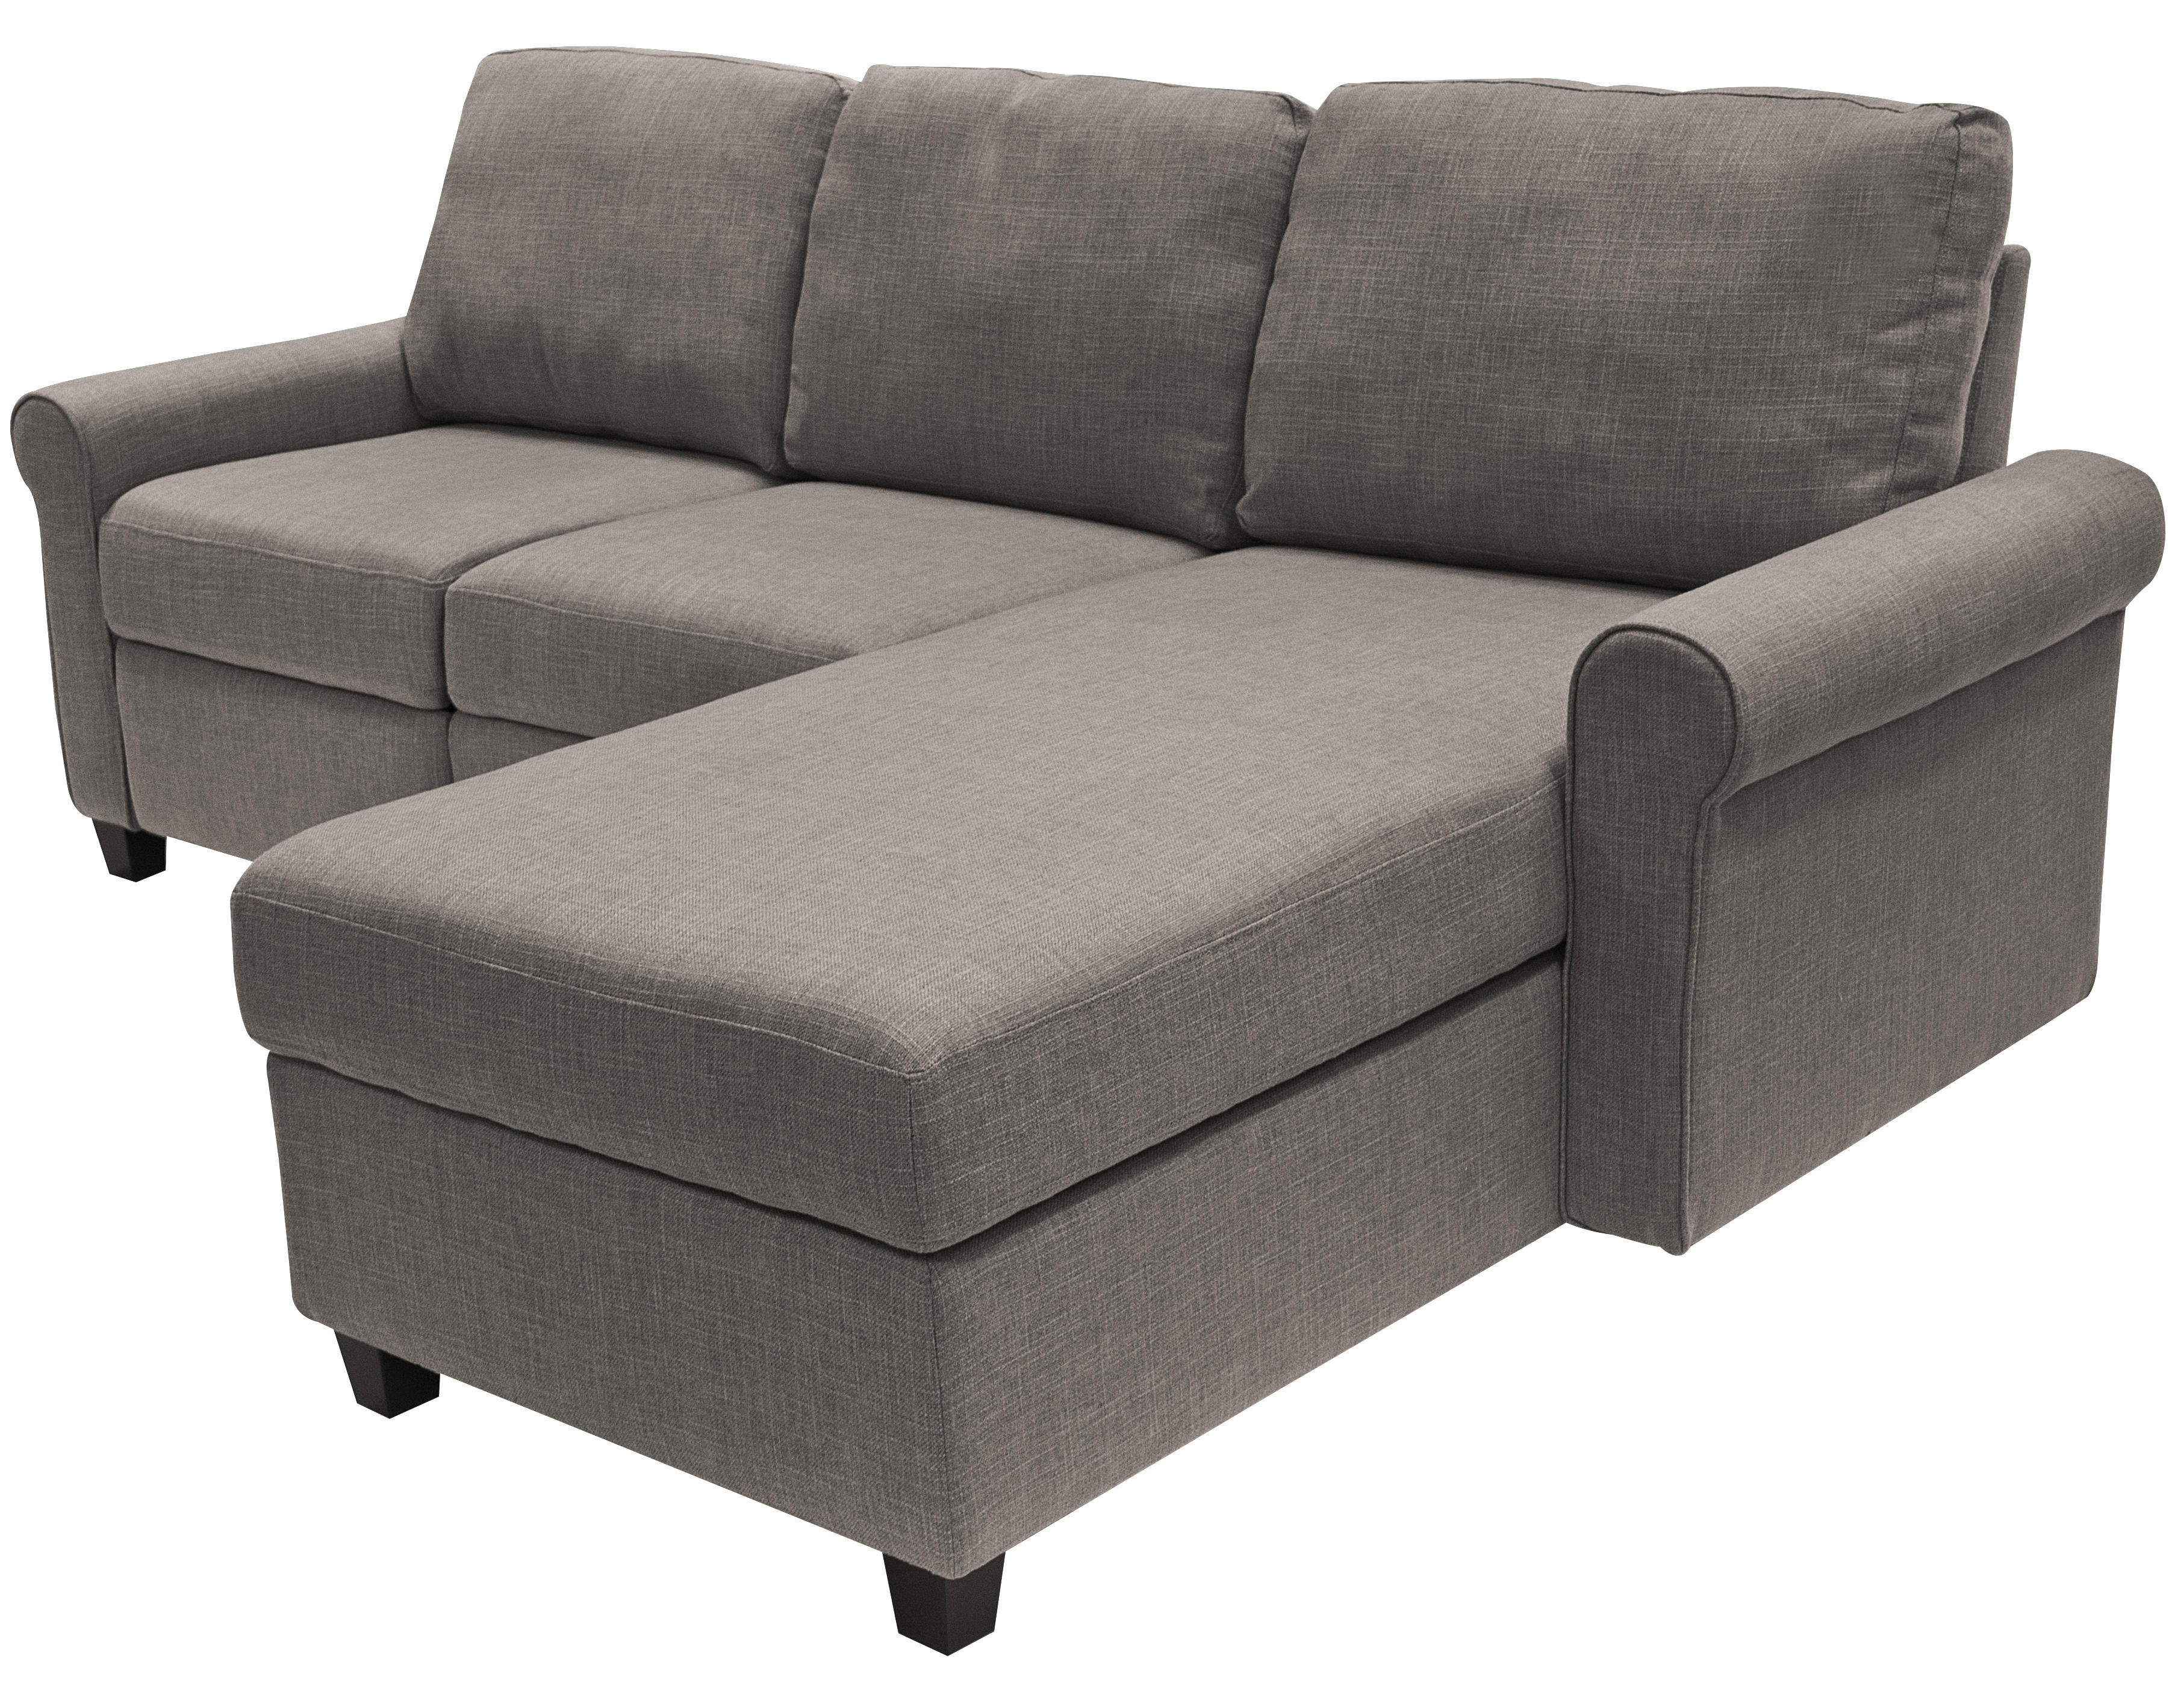 Serta Copenhagen Reclining Sectional with Right Storage Chaise - Gray - image 2 of 10